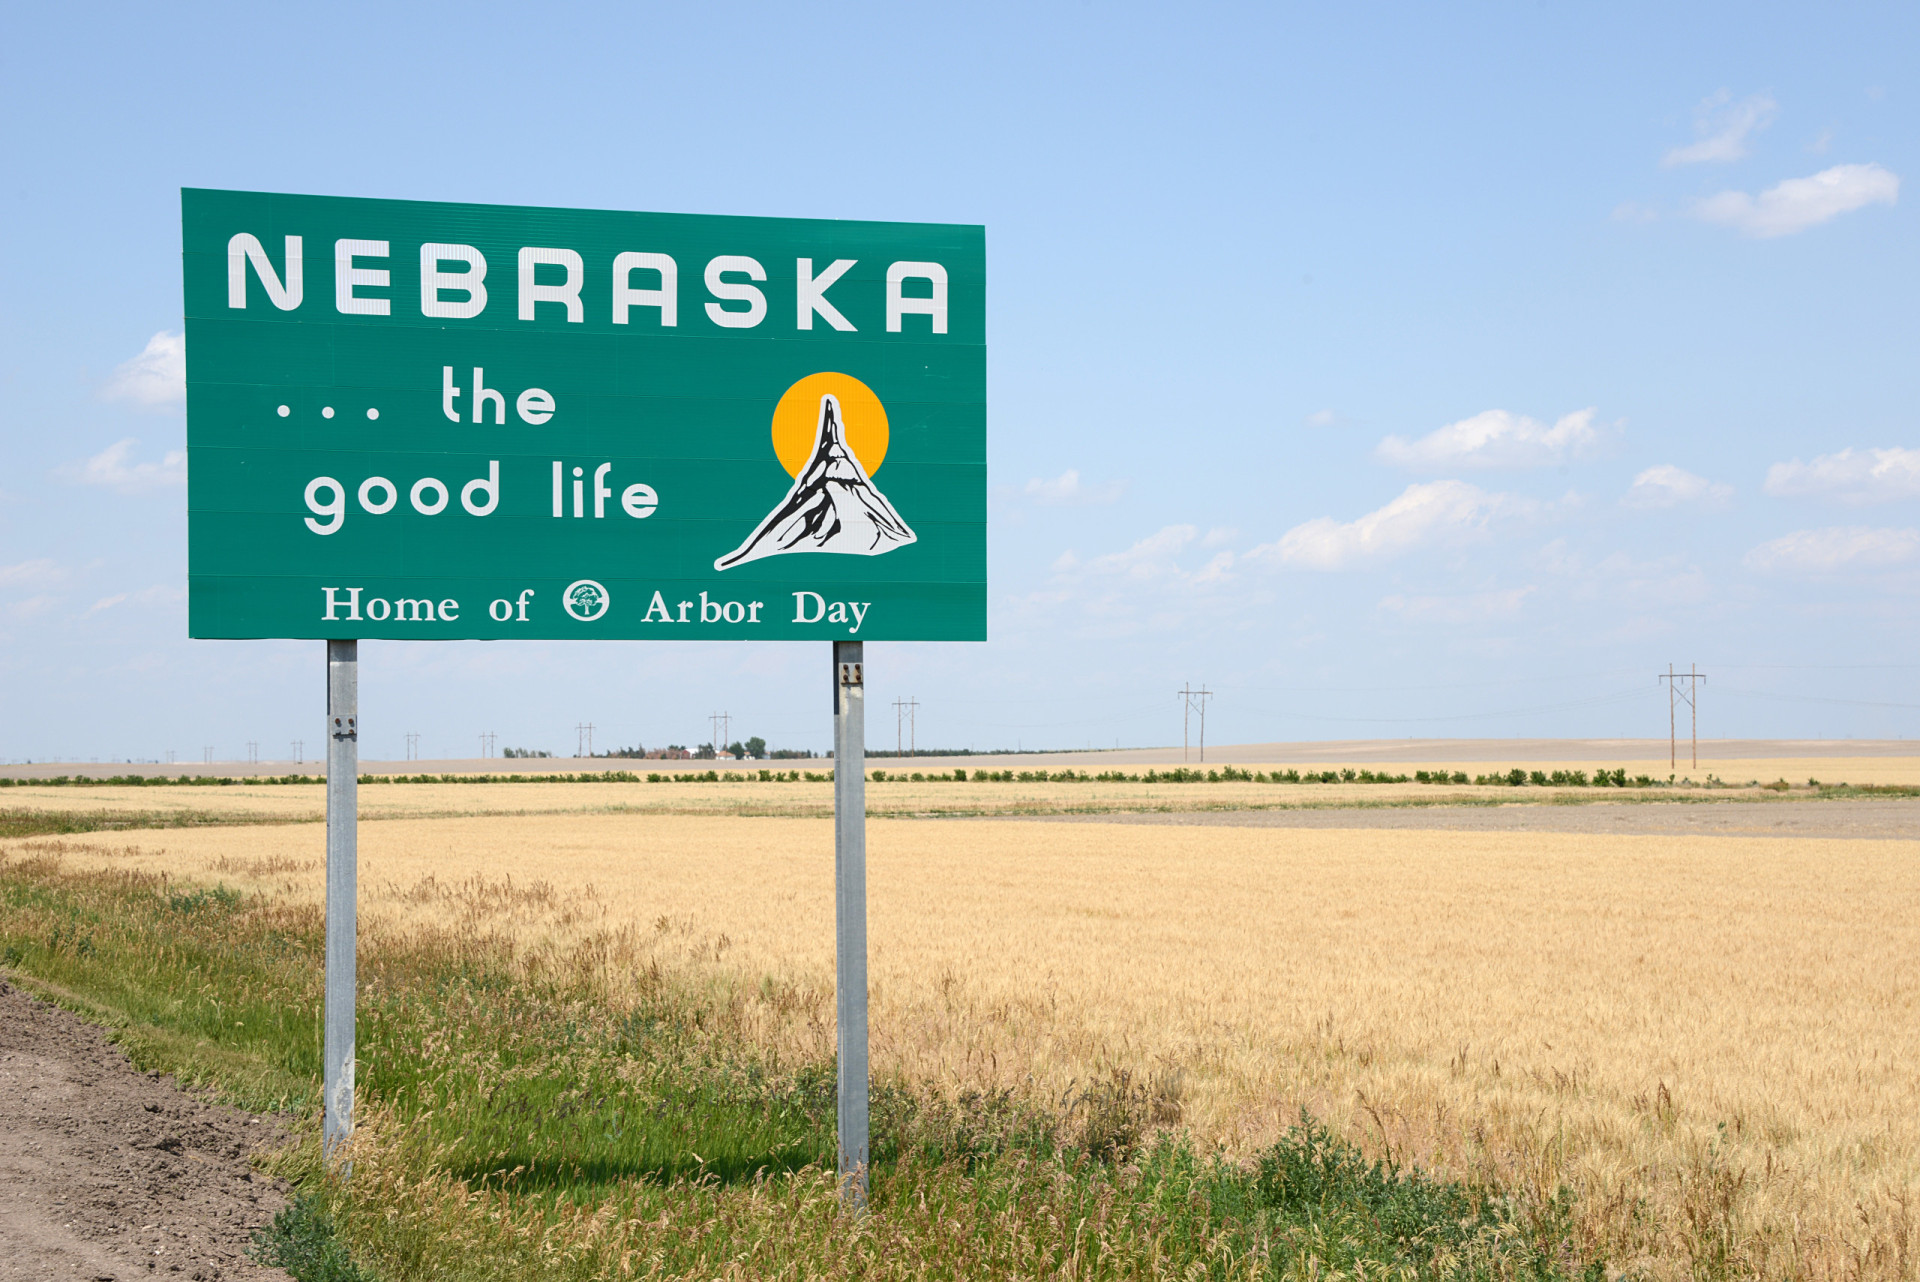 <p>Arbor Day was founded in Nebraska, hence the reference.  </p><p><a href="https://www.msn.com/en-us/community/channel/vid-7xx8mnucu55yw63we9va2gwr7uihbxwc68fxqp25x6tg4ftibpra?cvid=94631541bc0f4f89bfd59158d696ad7e">Follow us and access great exclusive content every day</a></p>